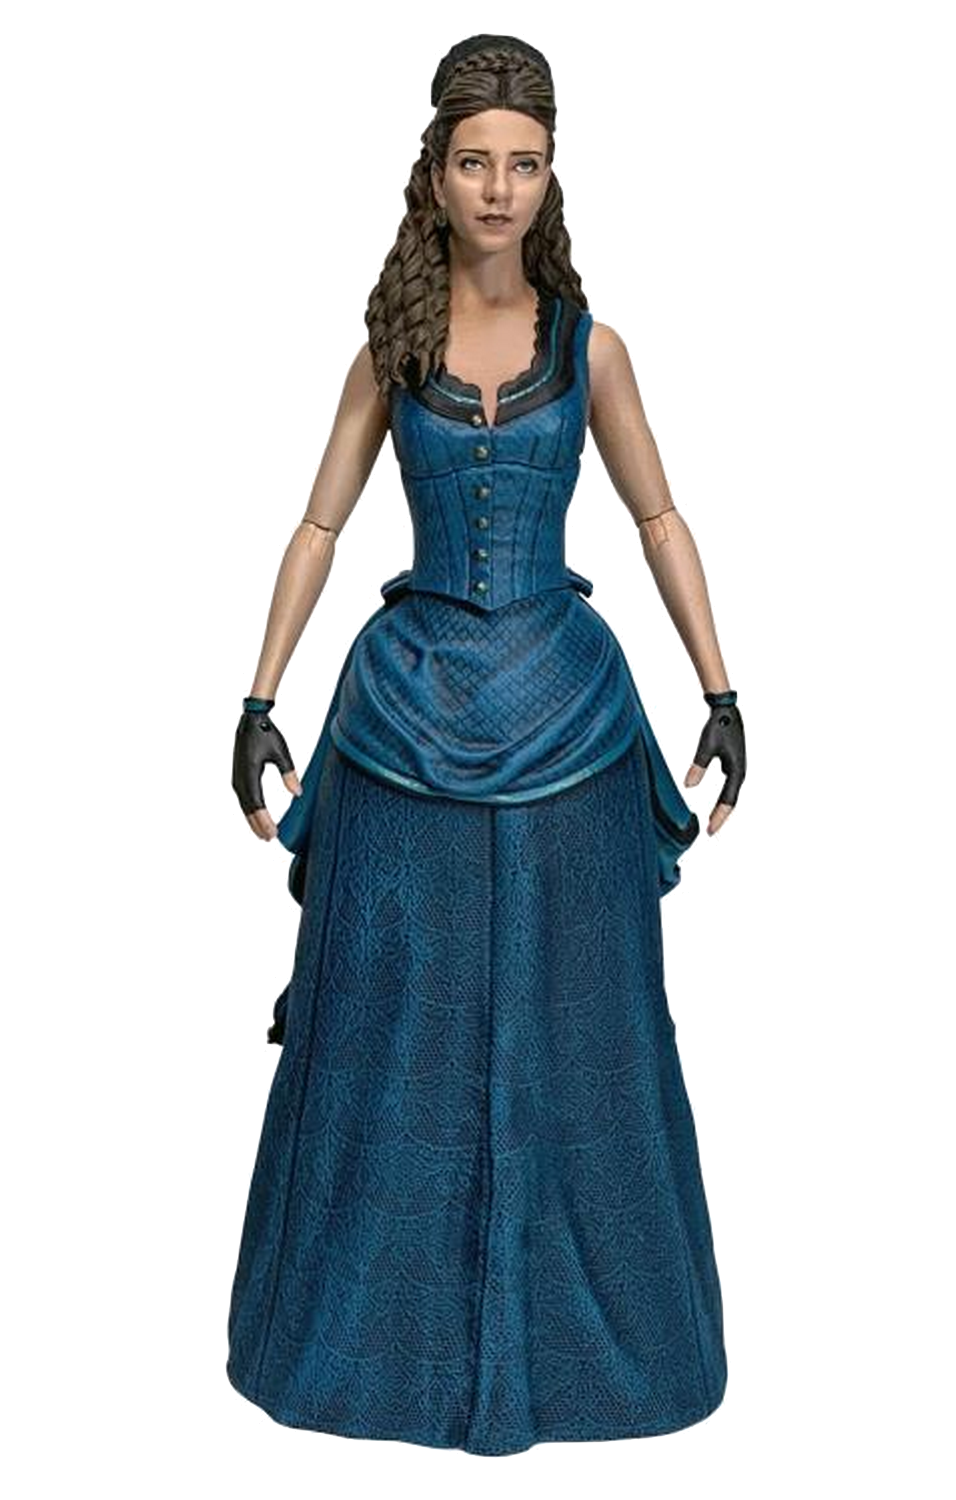 Clementine Pennyfeather - Westworld Serie 2 - Diamond Select